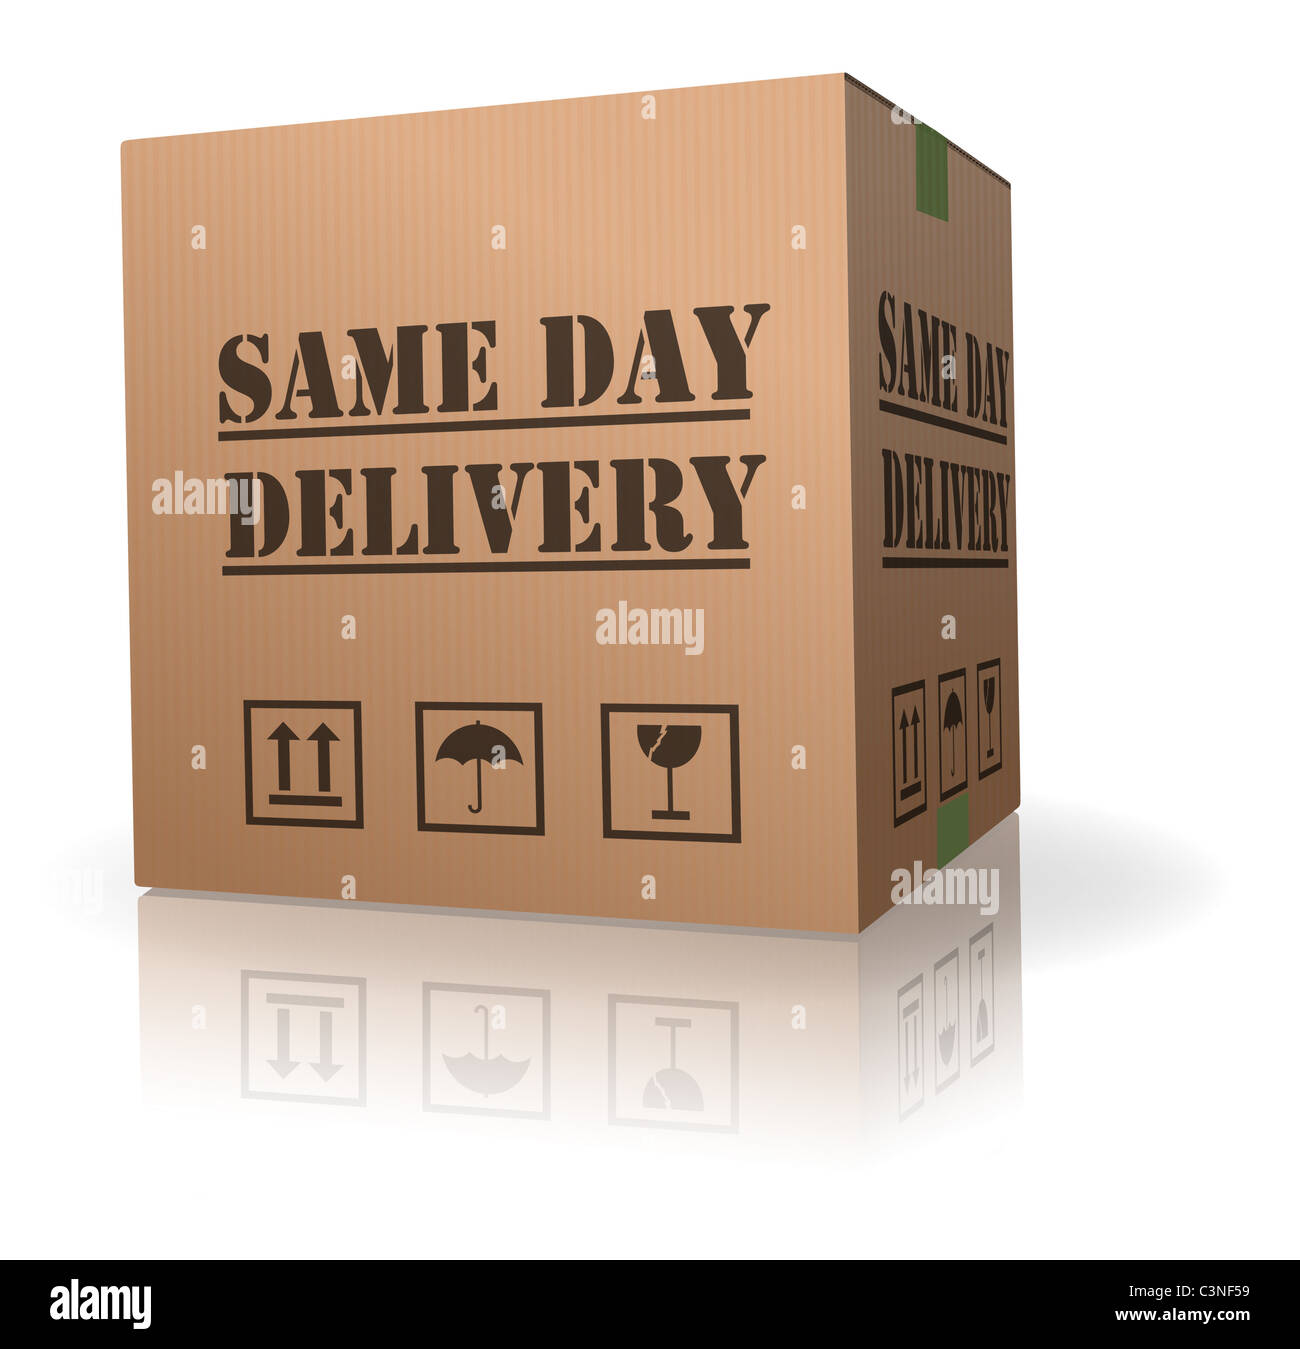 https://c8.alamy.com/comp/C3NF59/package-delivery-same-day-shipment-urgent-and-quick-C3NF59.jpg